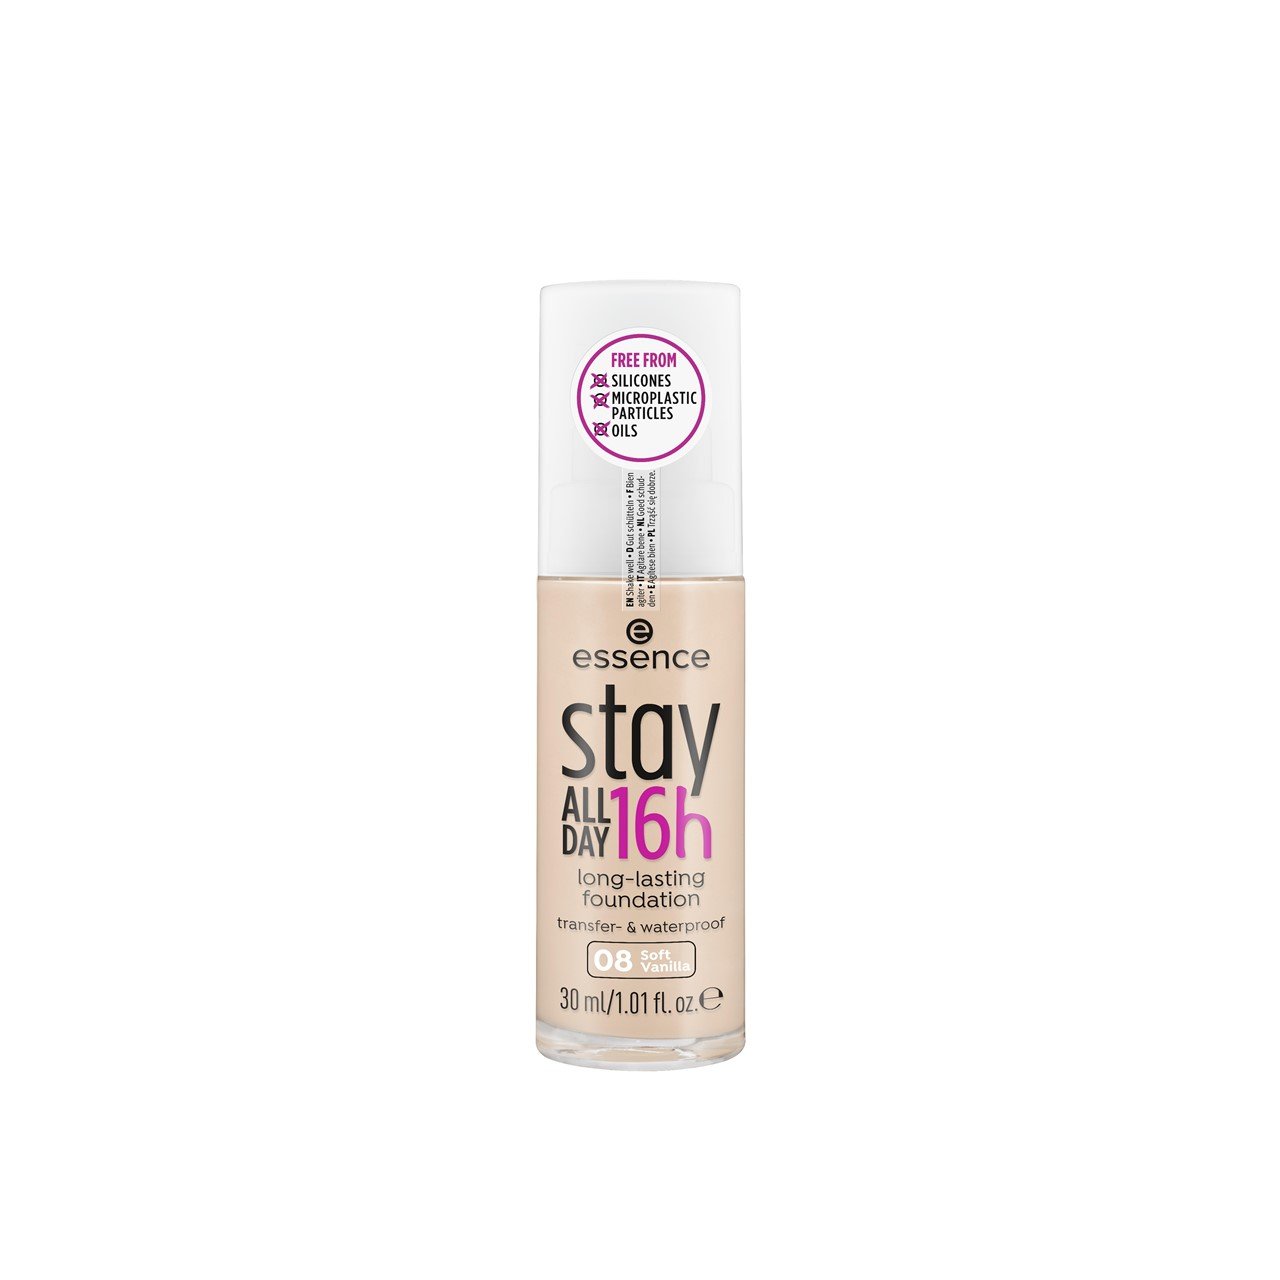 essence · Day Stay Buy USA 16h All Foundation Long-Lasting